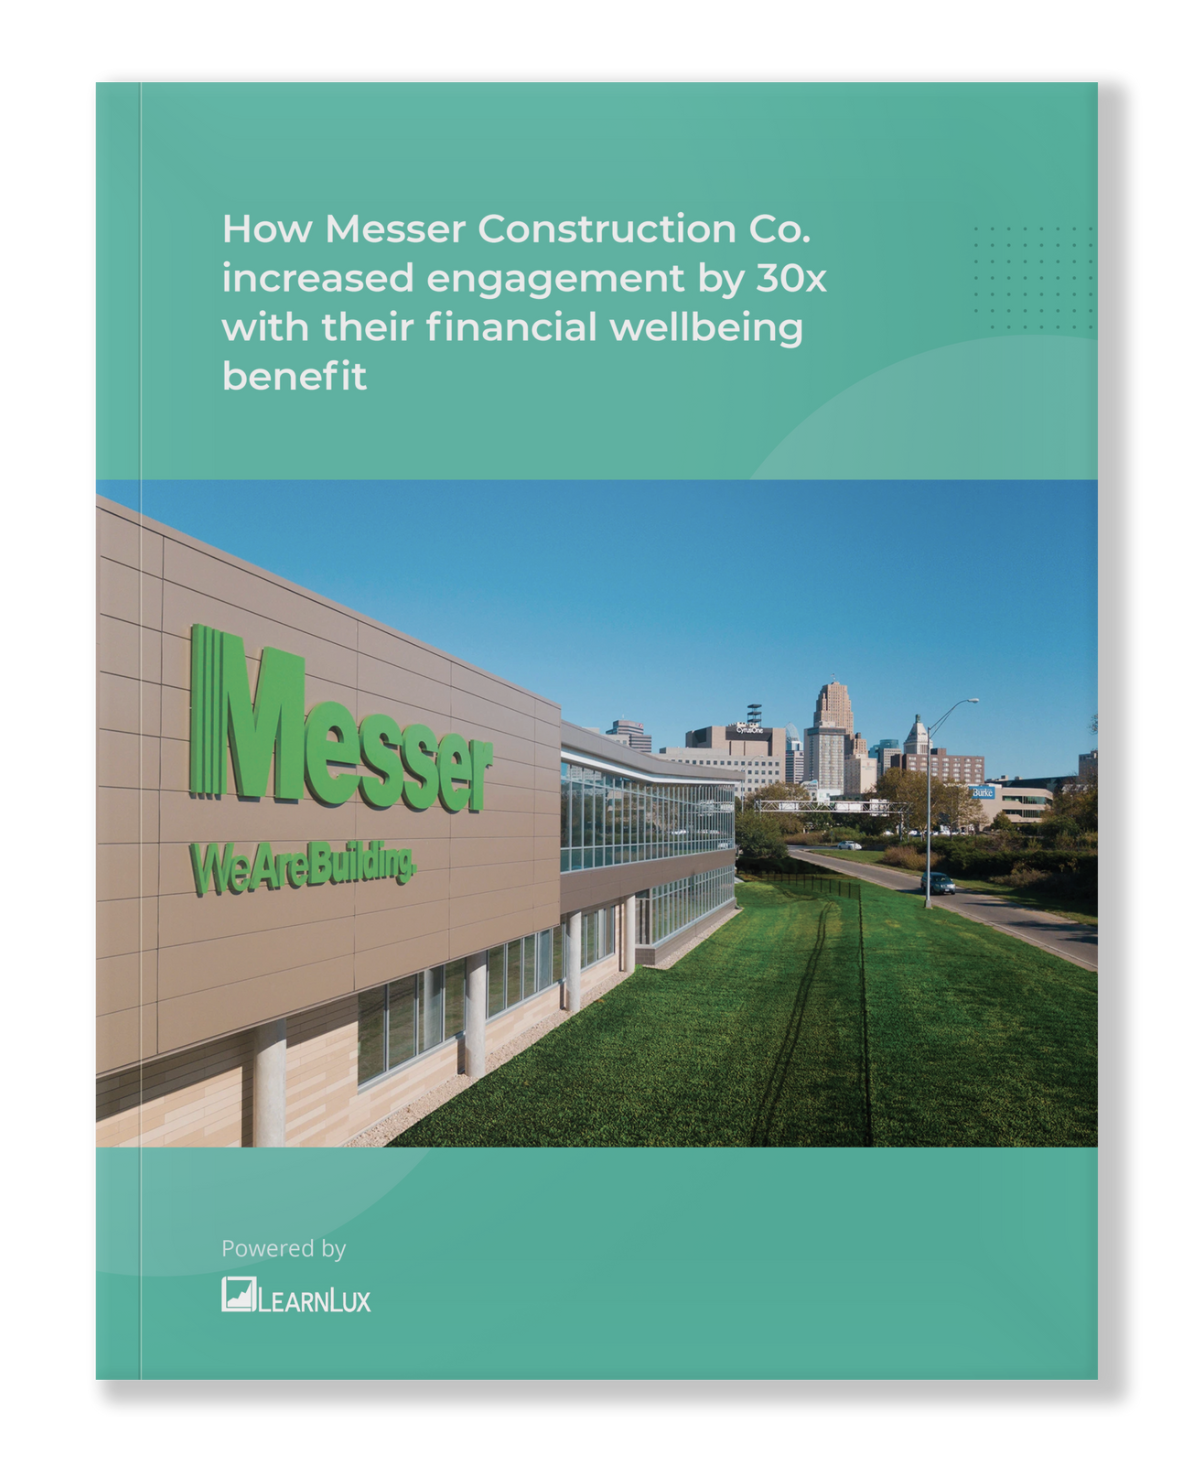 Messer financial wellbeing case study with LearnLux